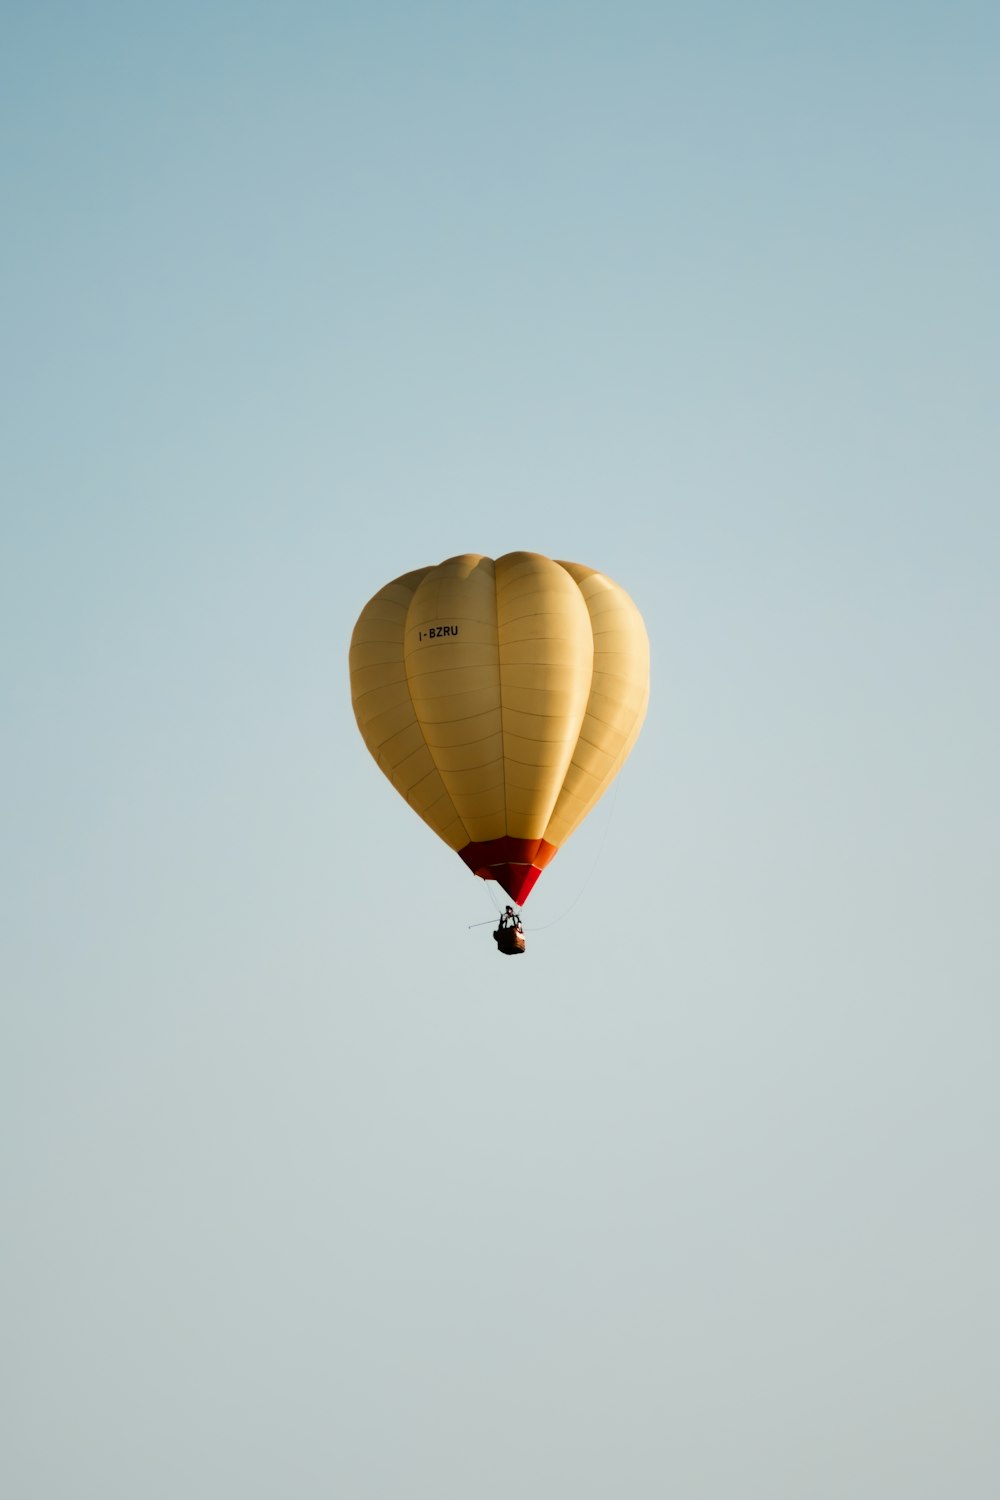 a hot air balloon flying in the sky